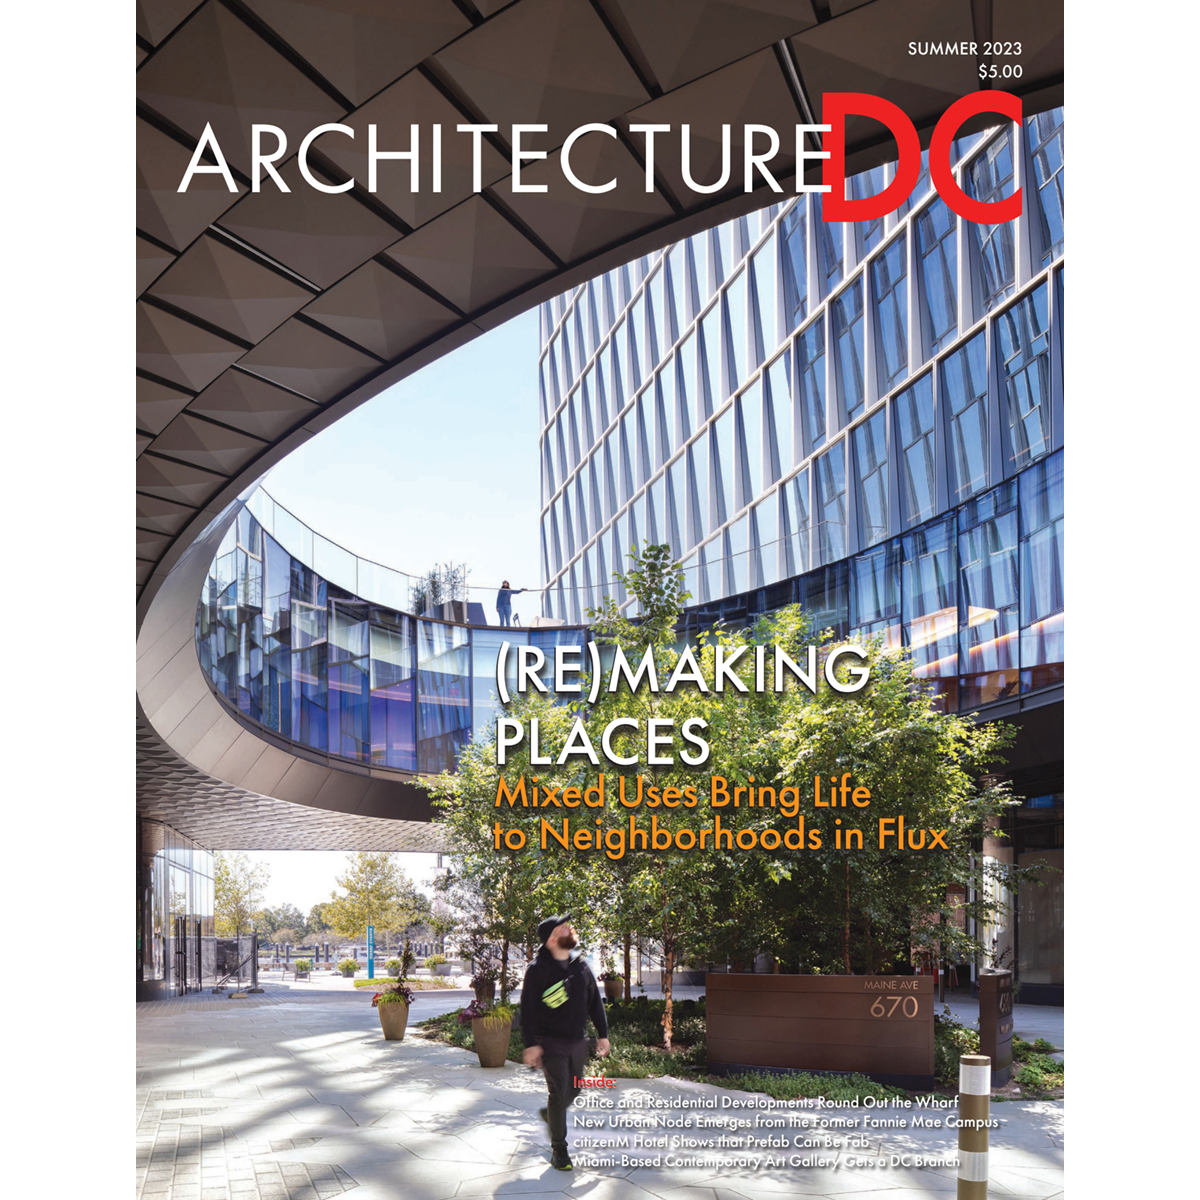 670/680 Maine Makes ArchDC Summer Cover